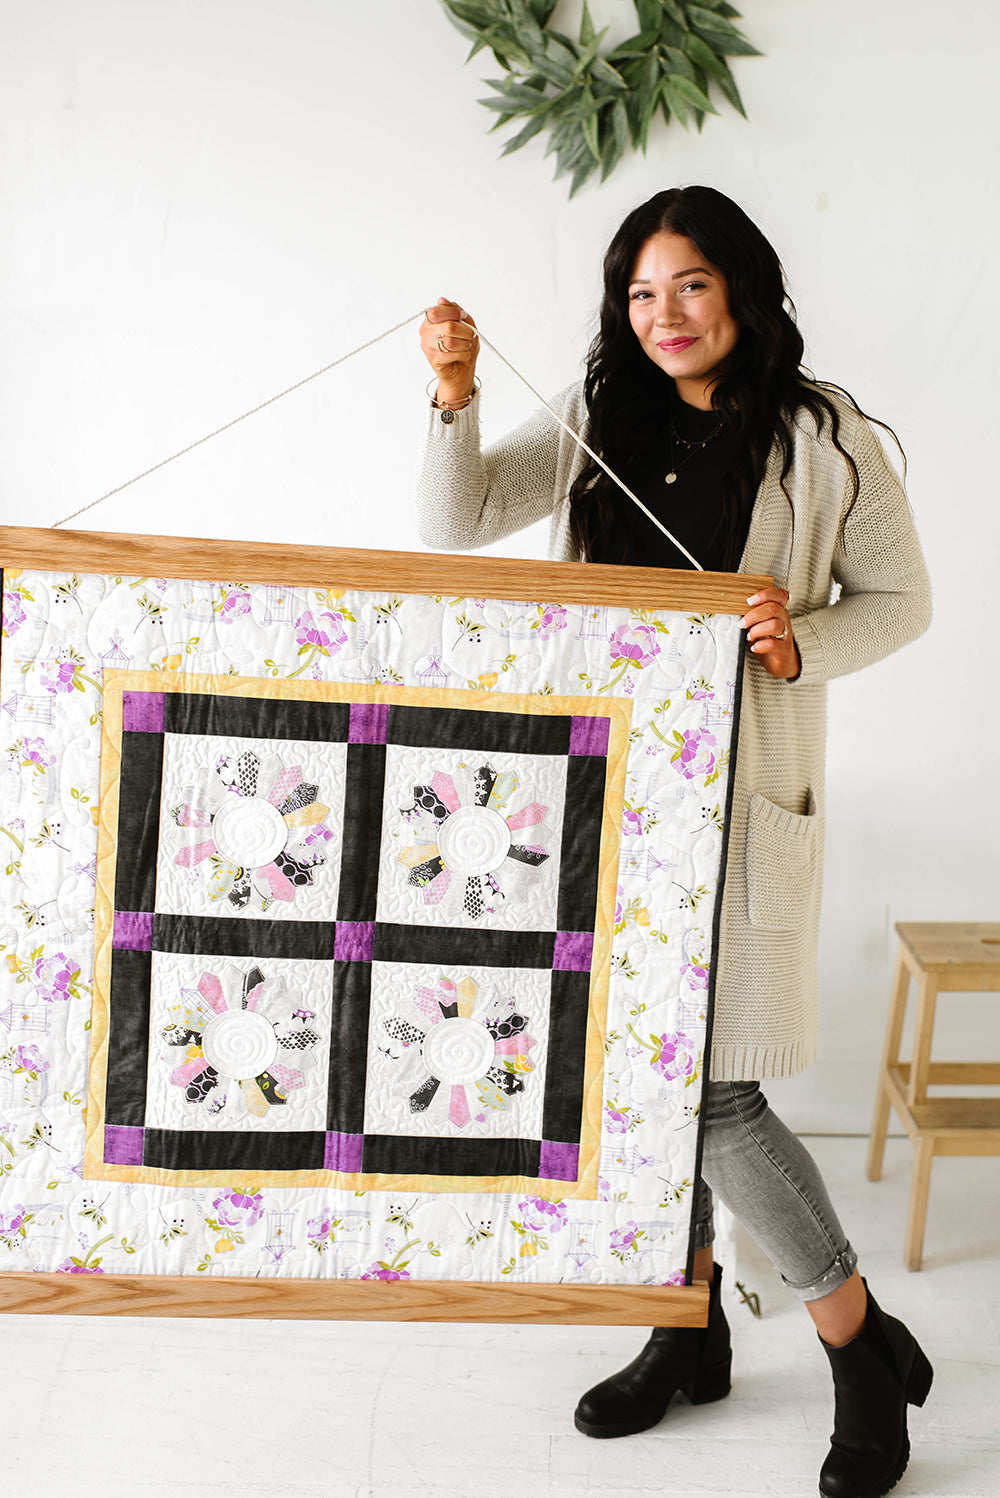 display a quilt